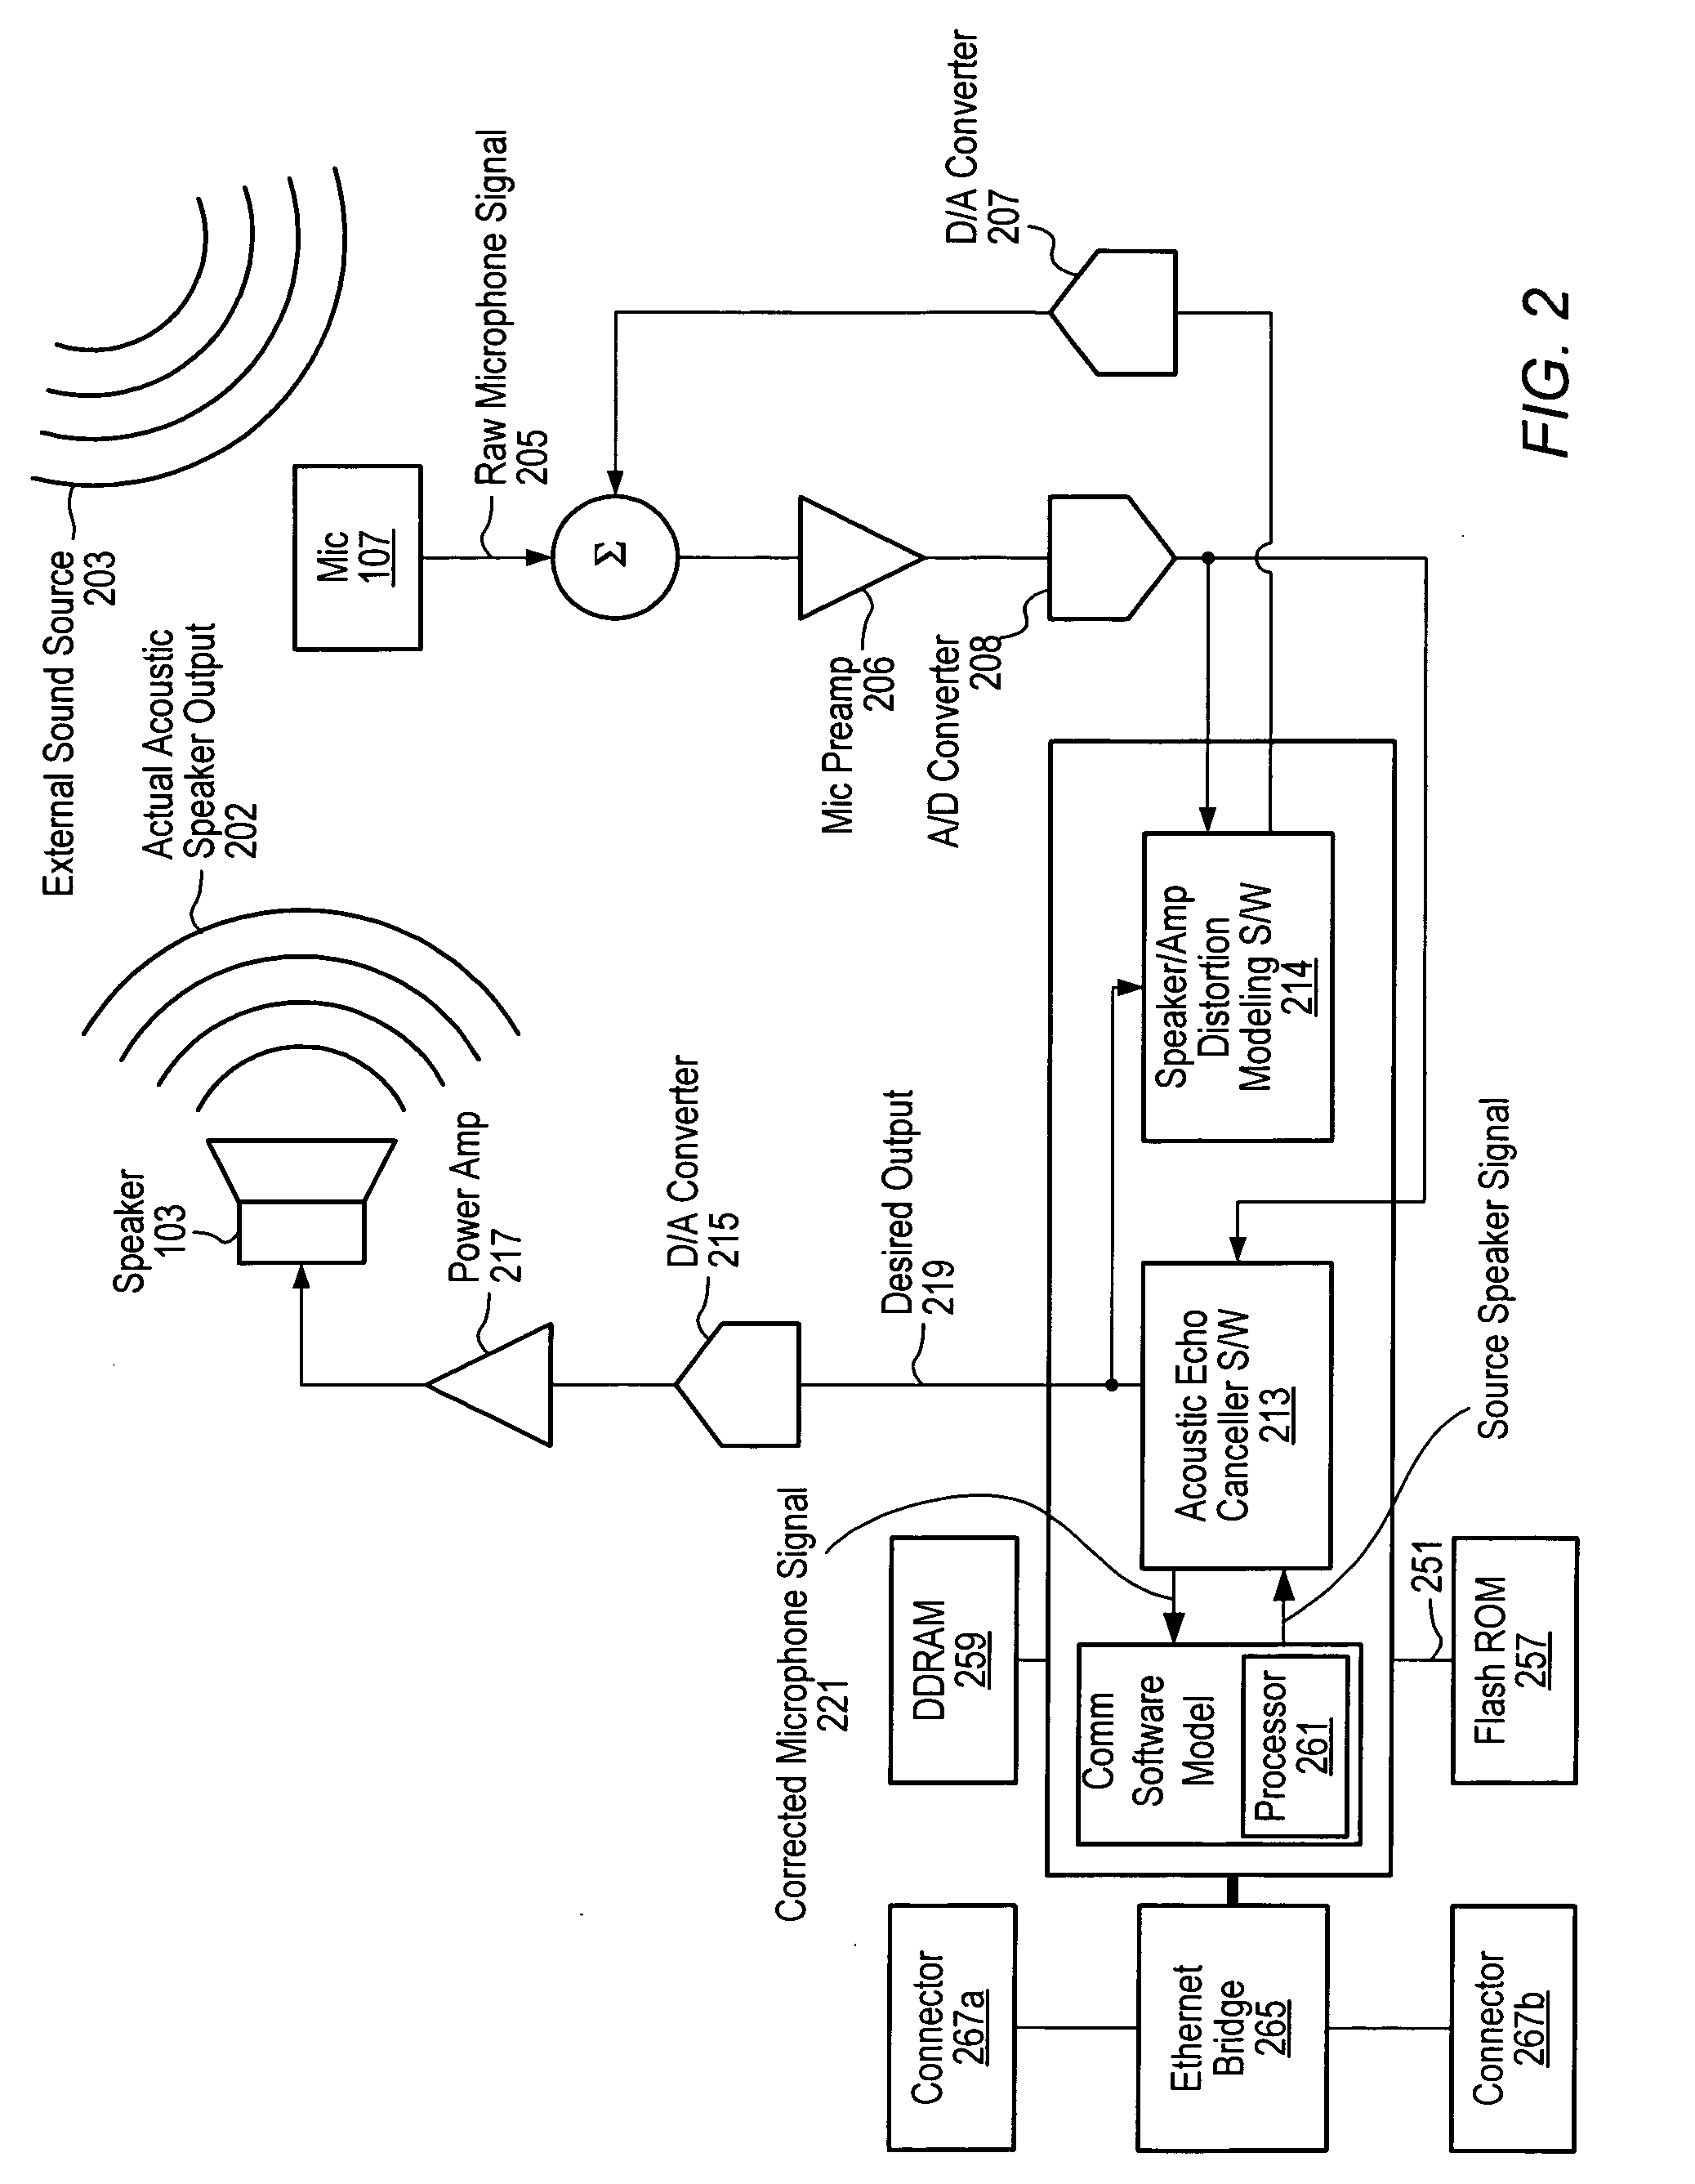 Speakerphone supporting video and audio features